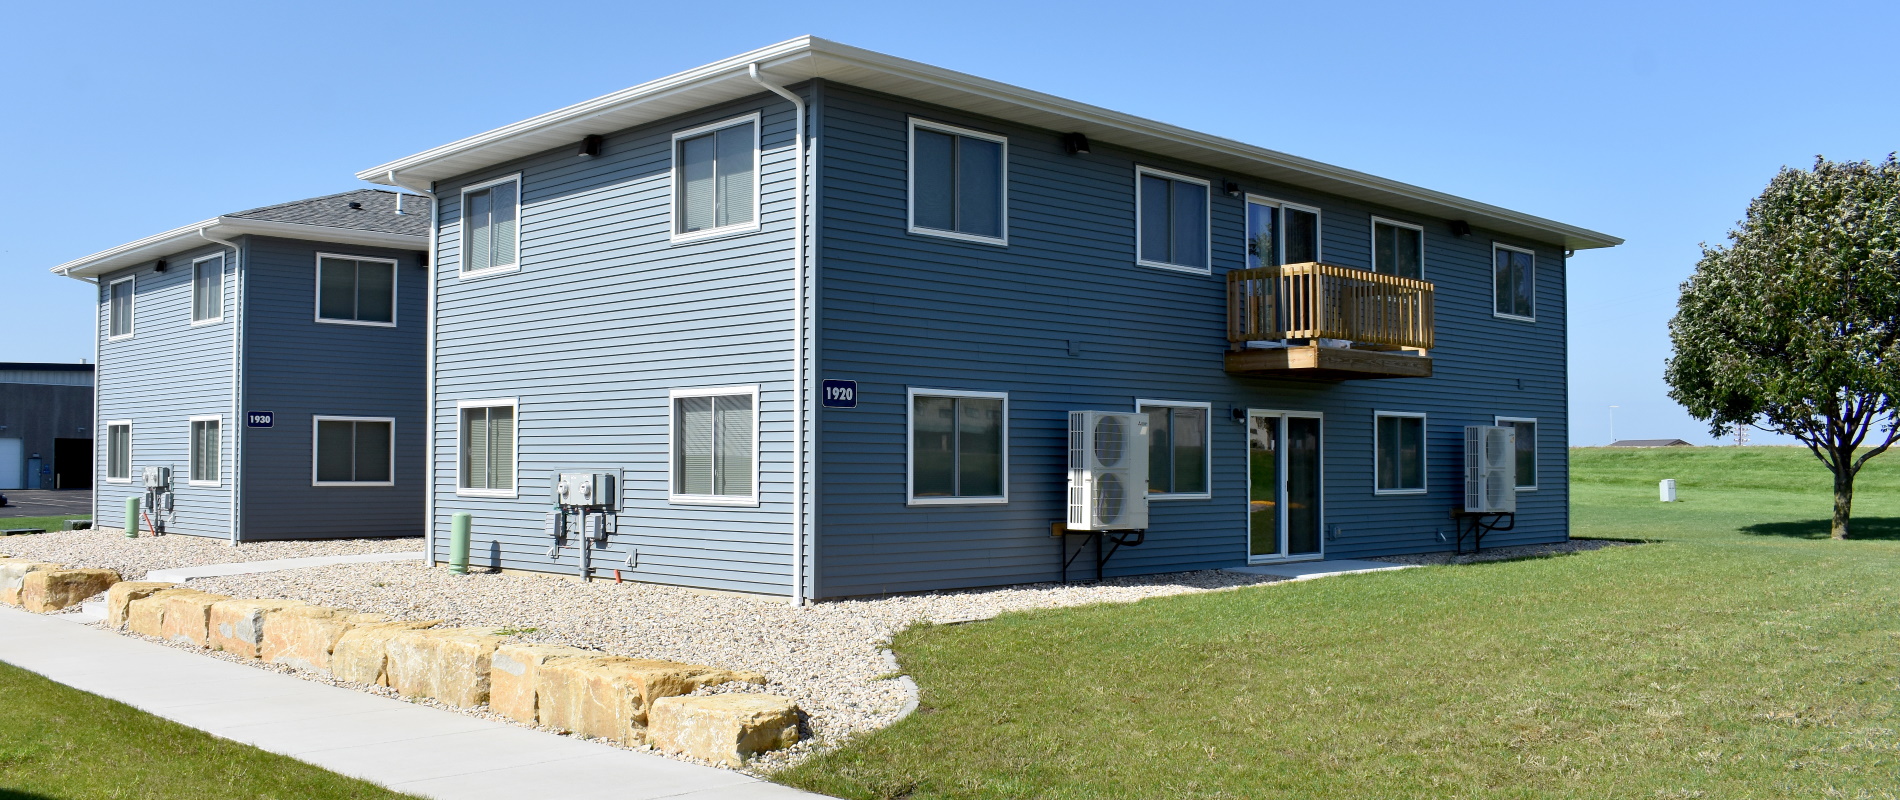 Exterior picture of 2-story duplex student housing